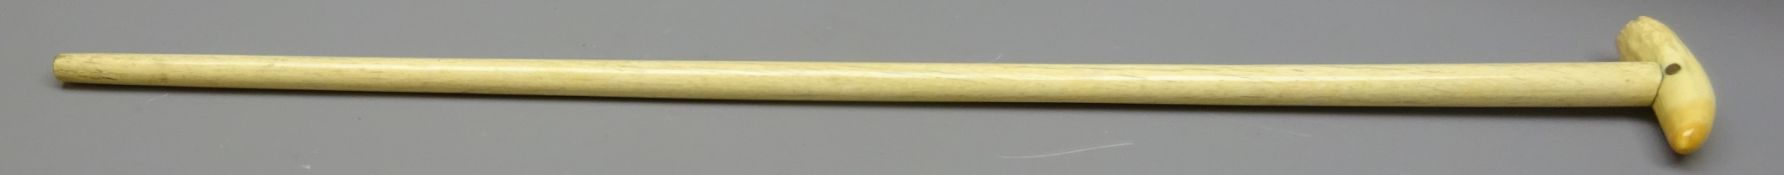 Victorian whalebone Walking stick with polished tooth handle,